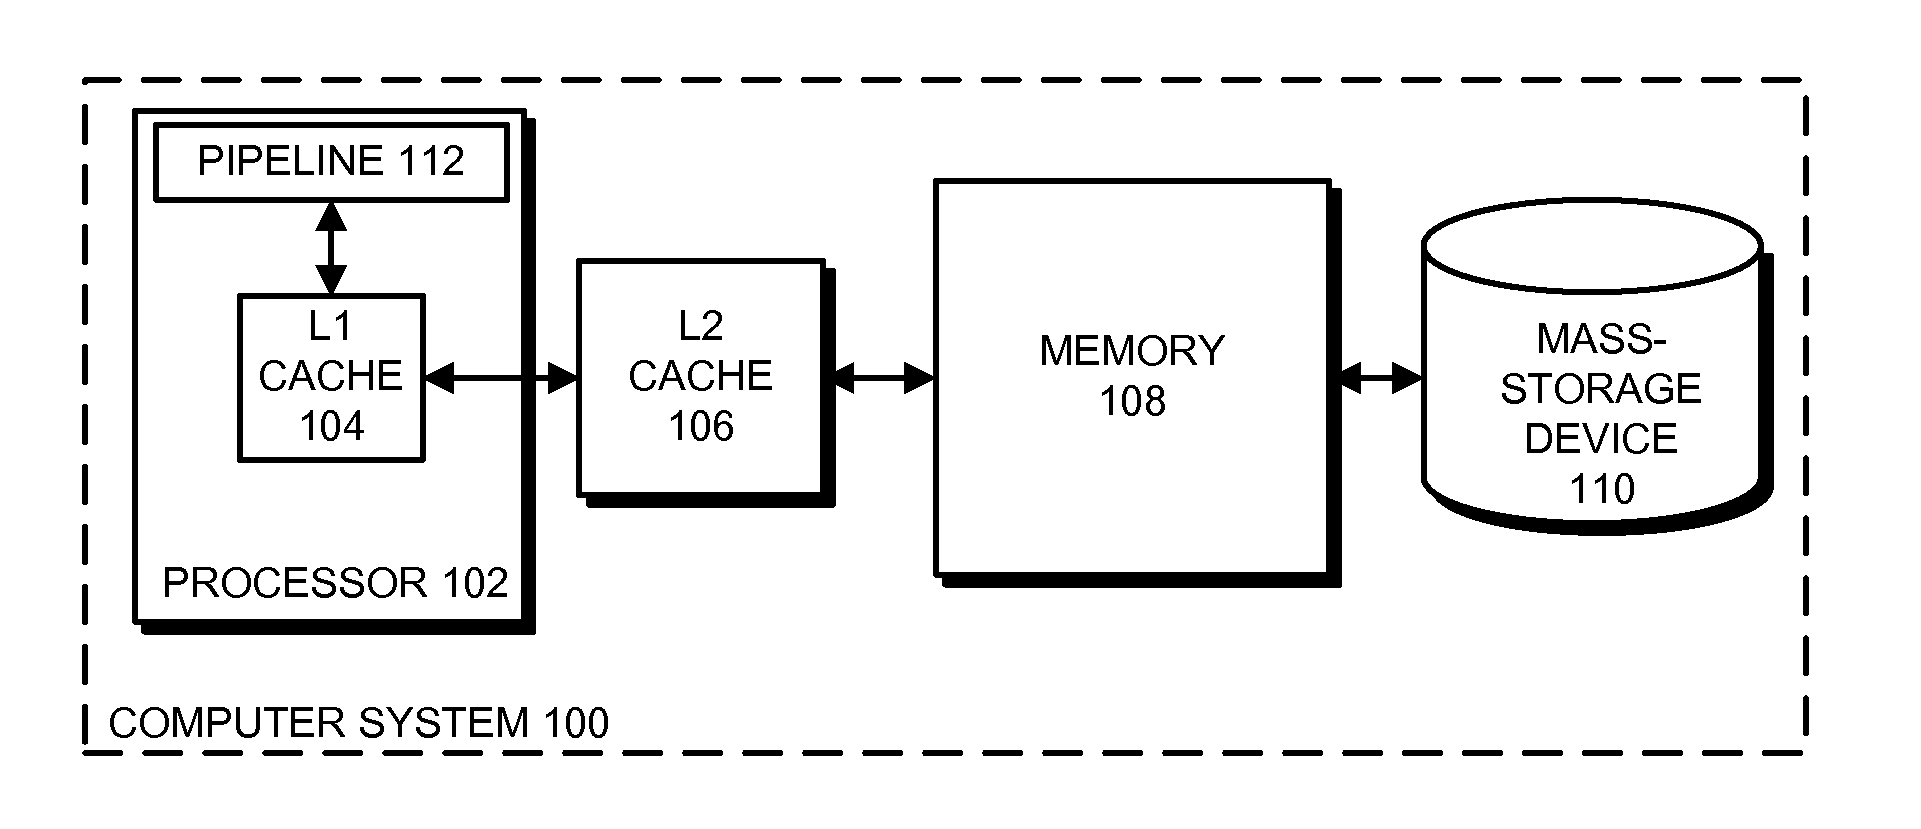 Hardware transactional memory acceleration through multiple failure recovery